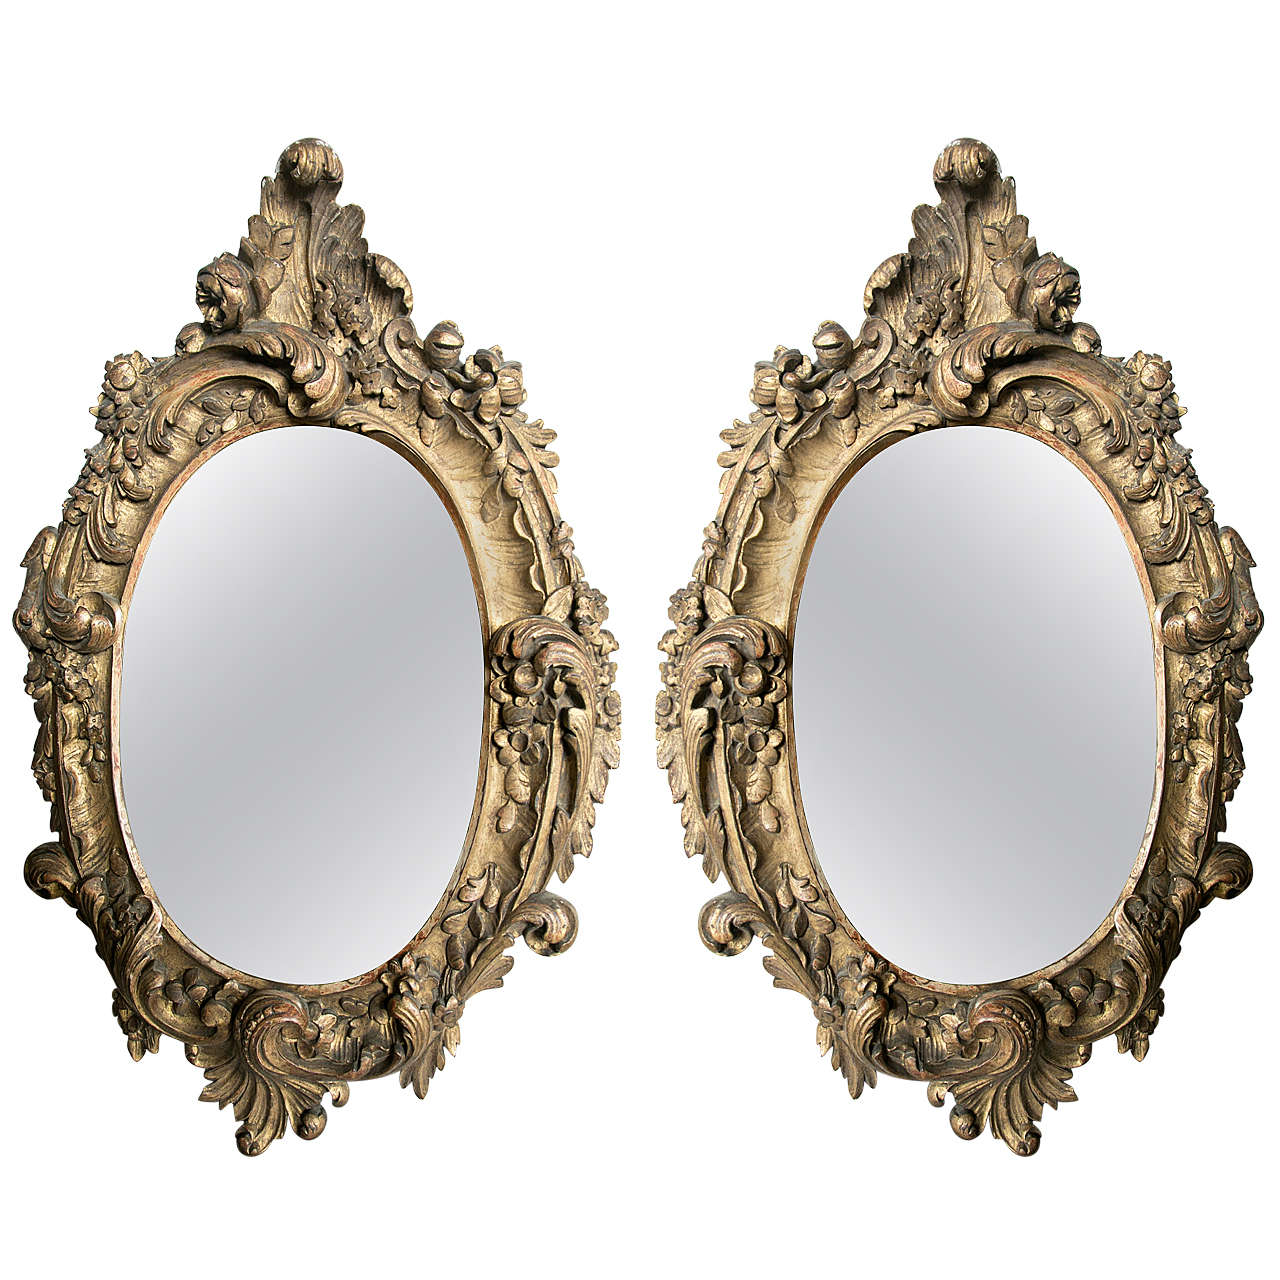 Pair of Oval Rococo Style Giltwood Mirrors For Sale at 1stdibs